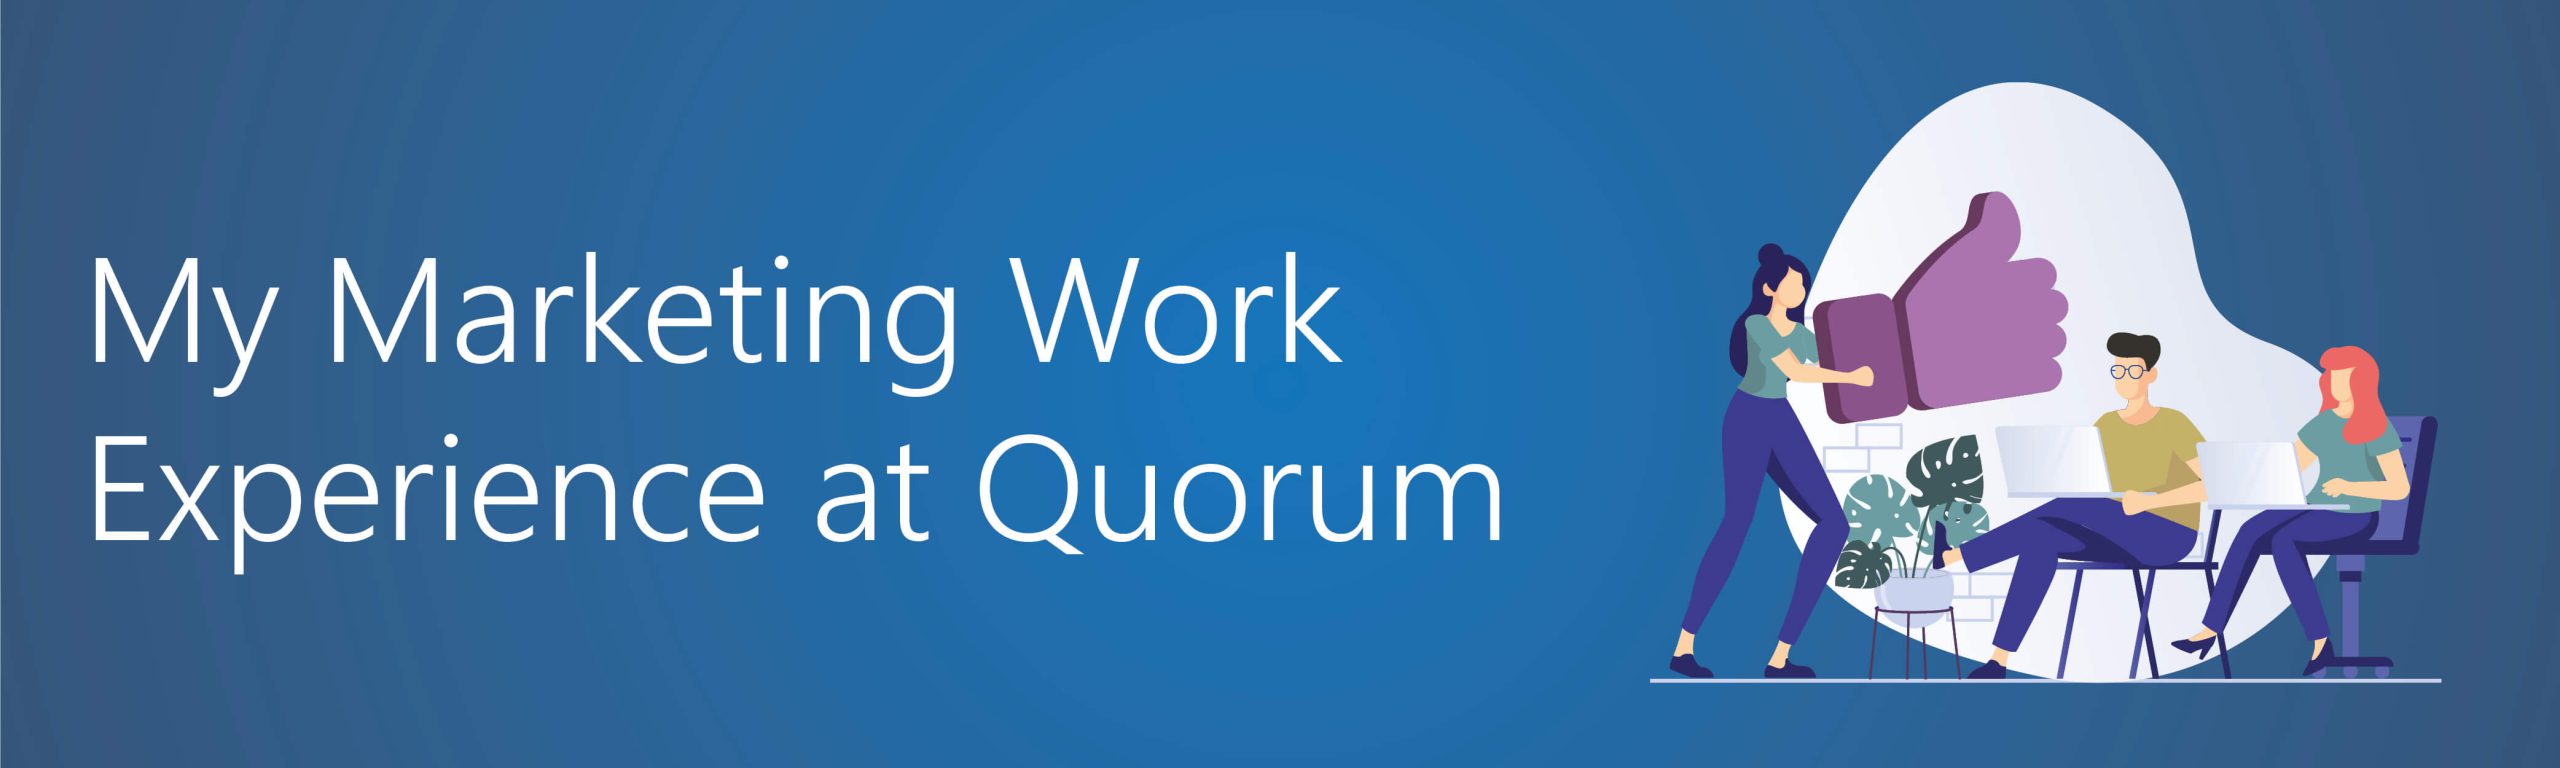 My Marketing Work Experience at Quorum Banner